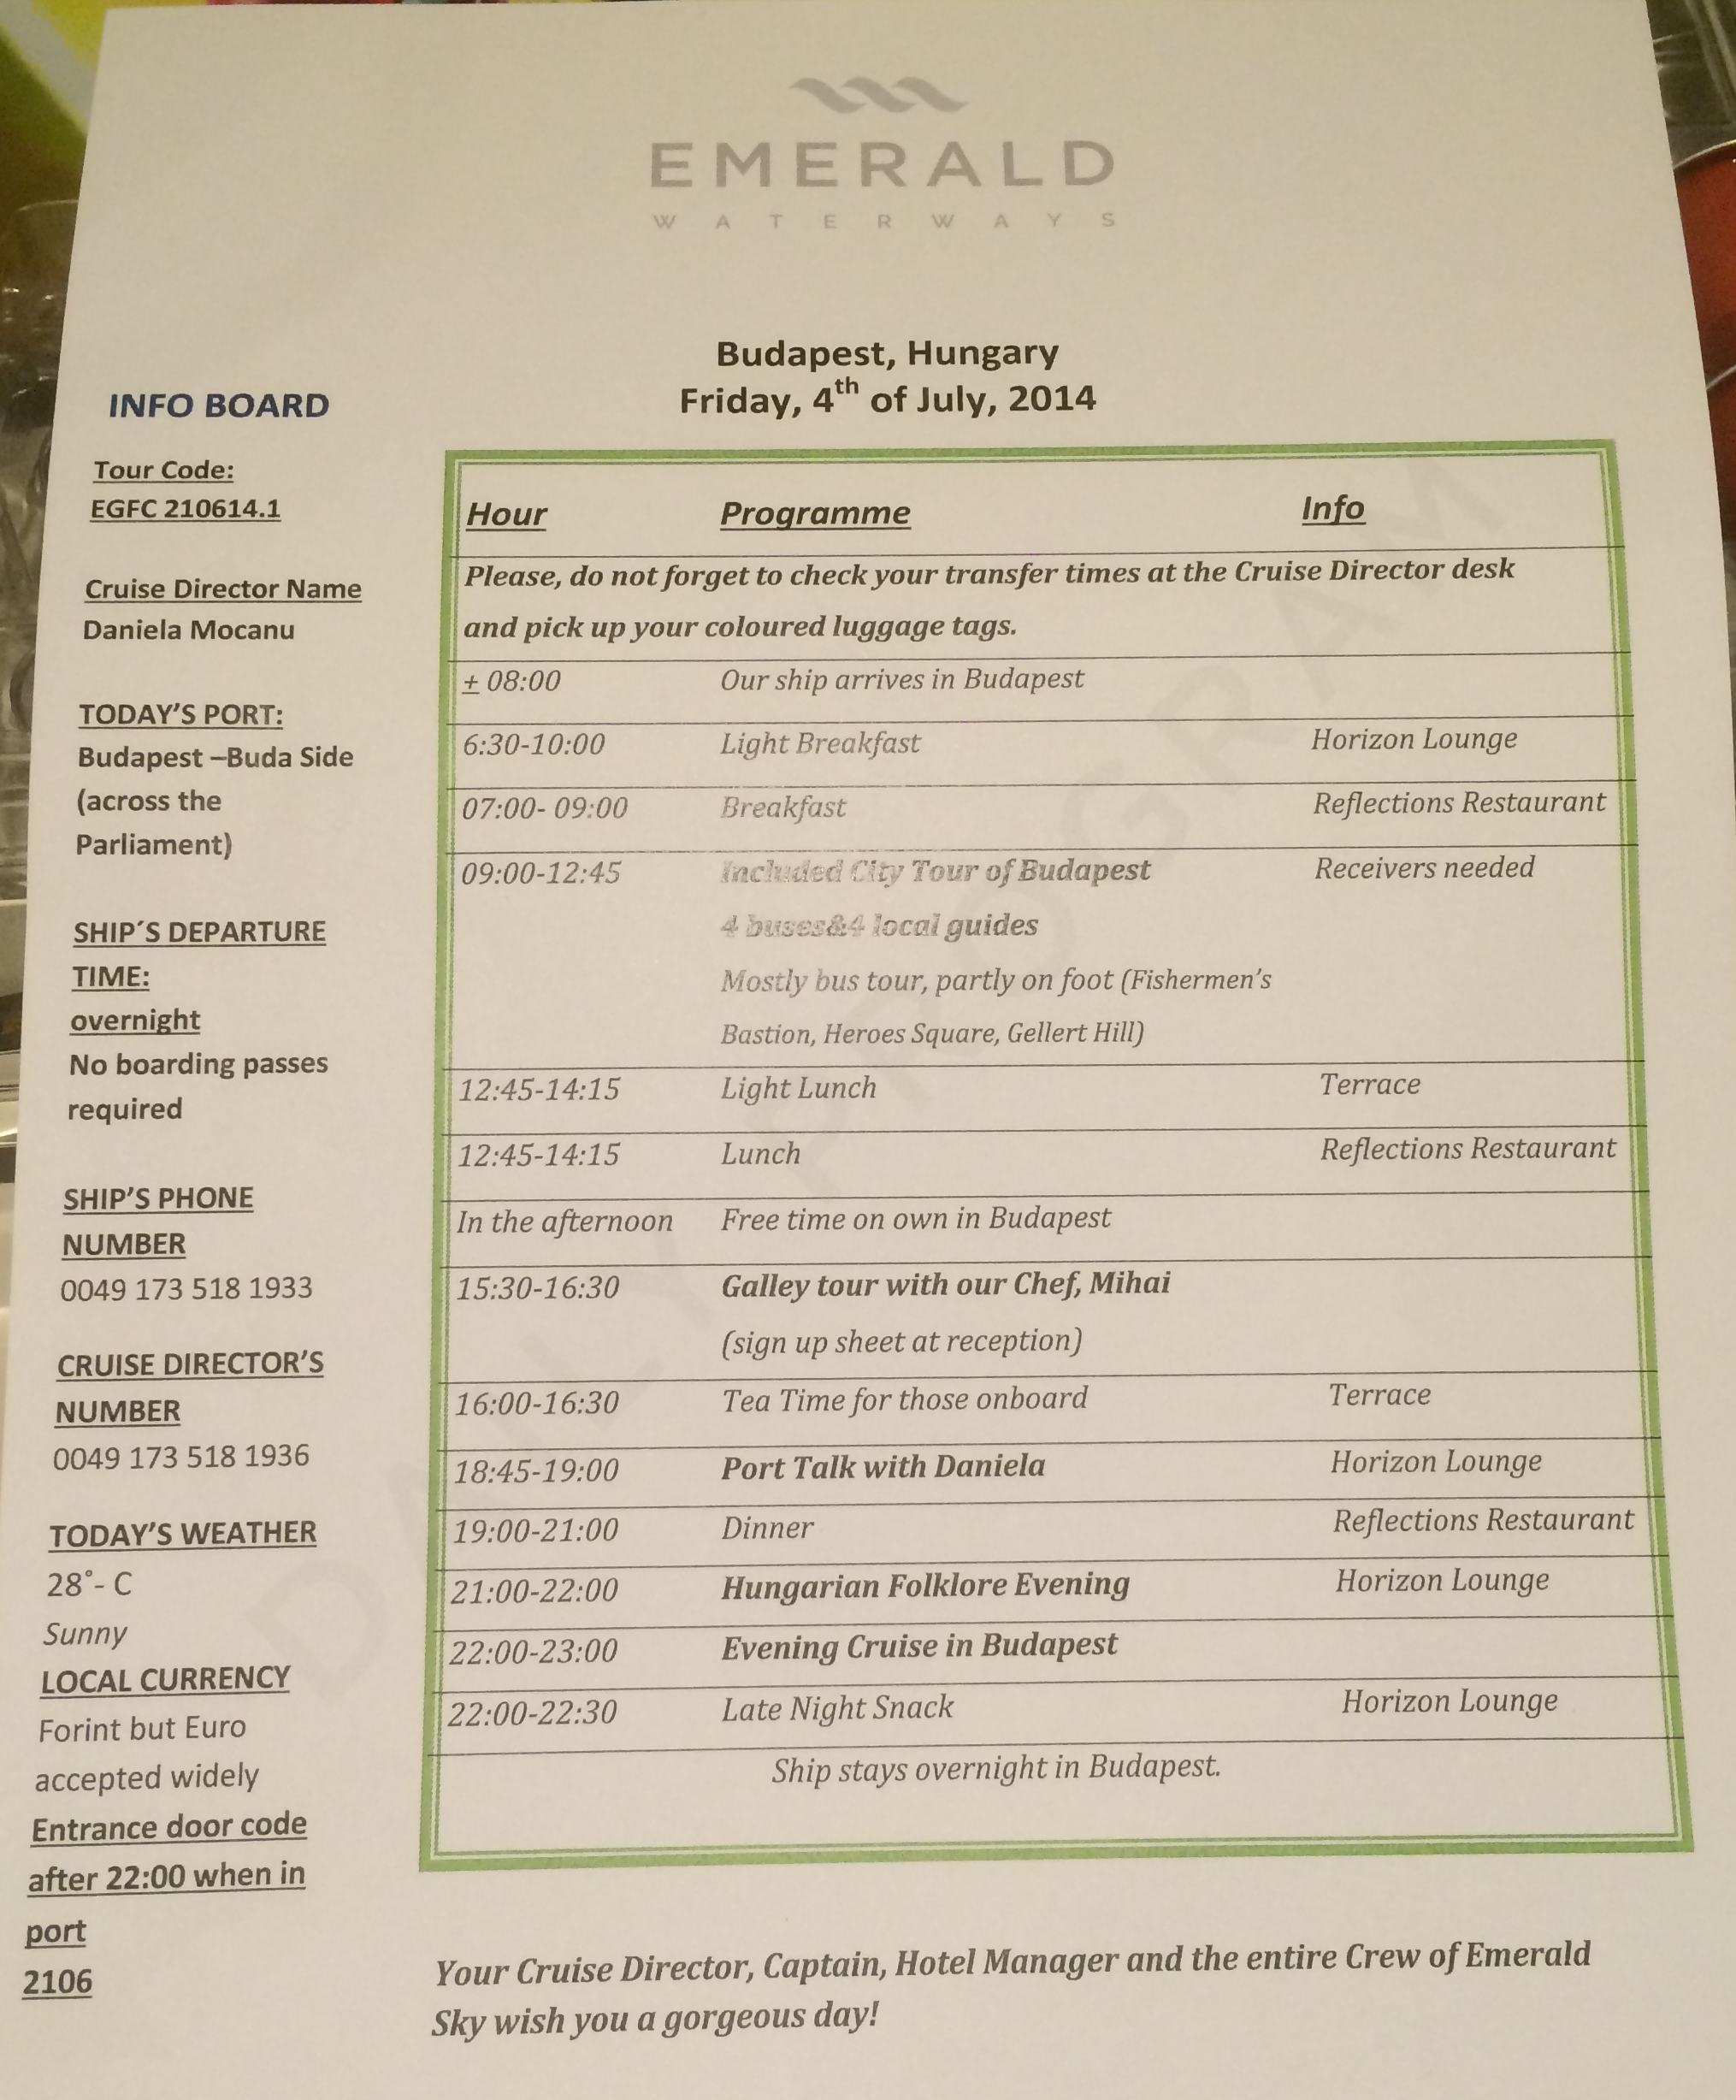 Daily programme of activities